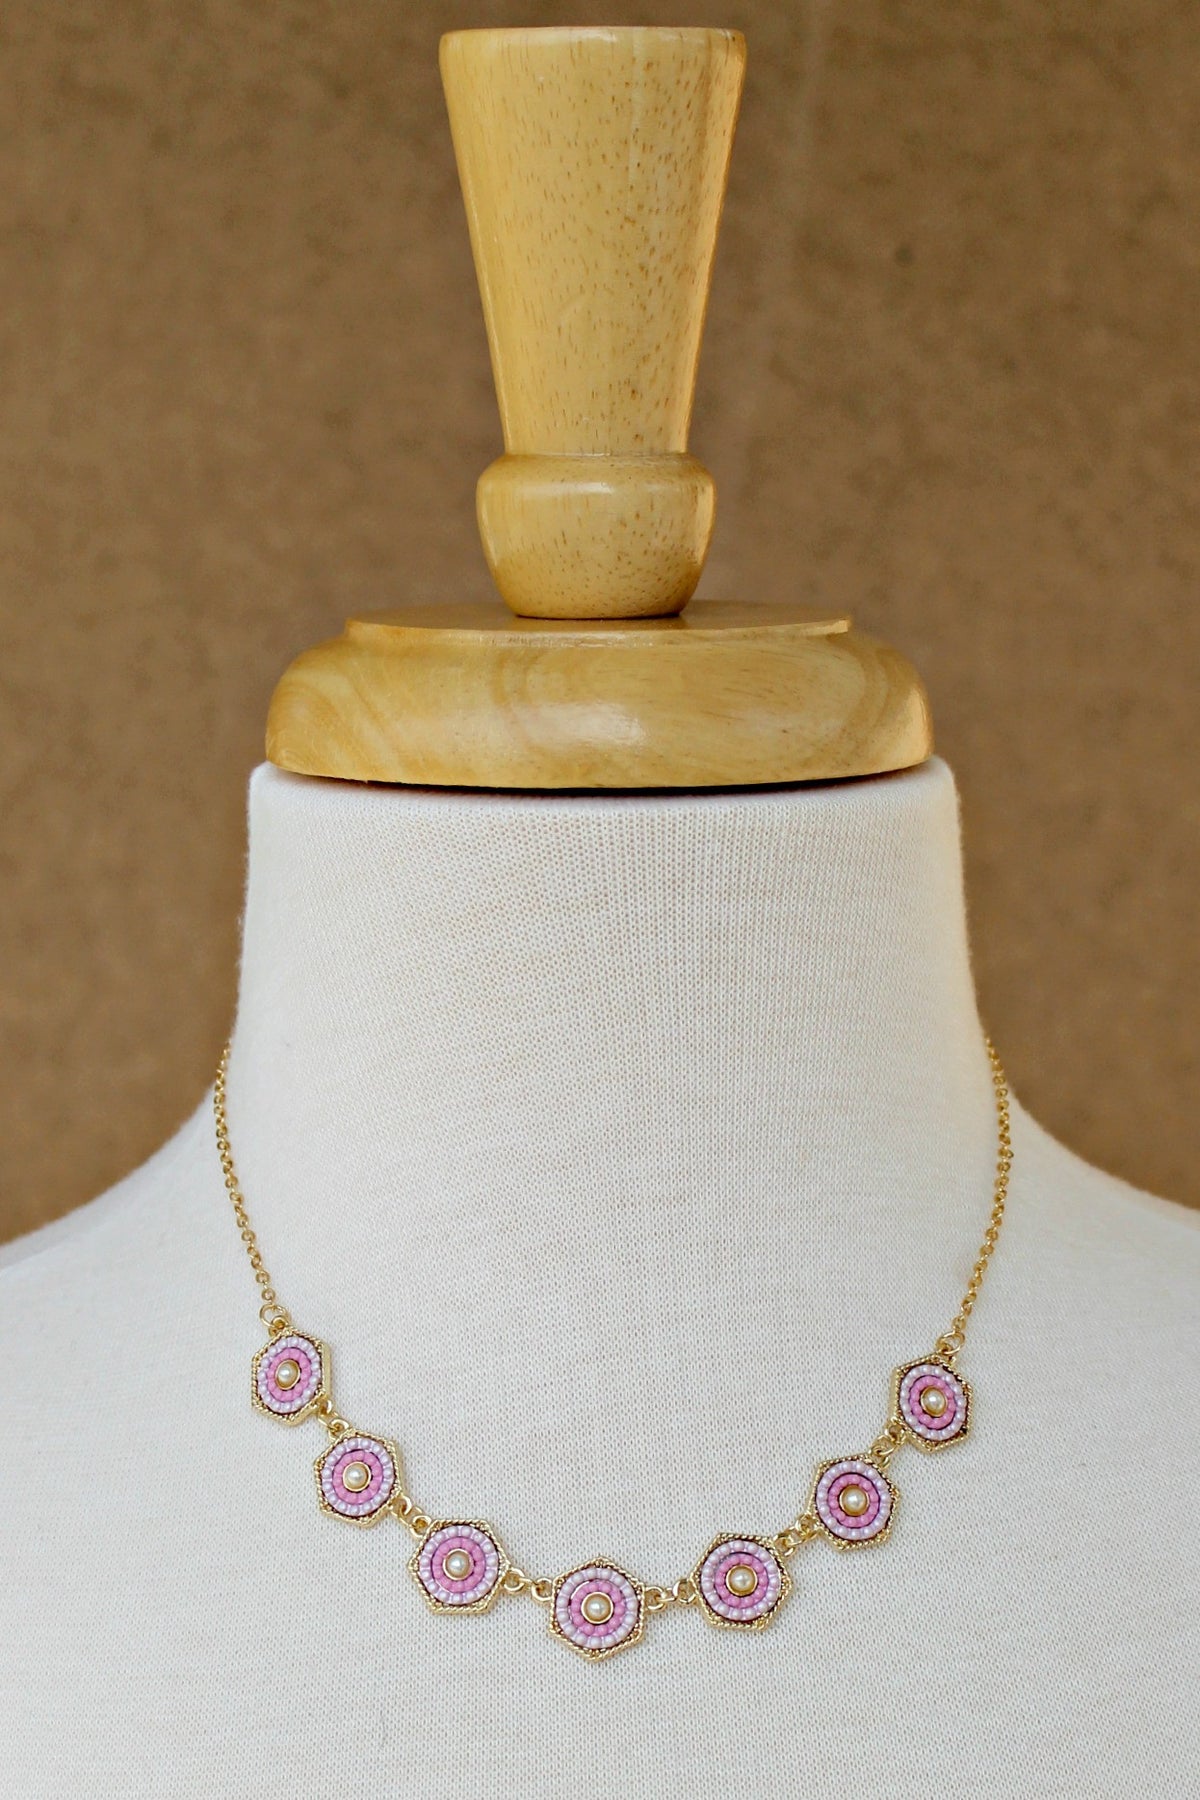 Hexagon Pearl and Bead Necklace, Pink